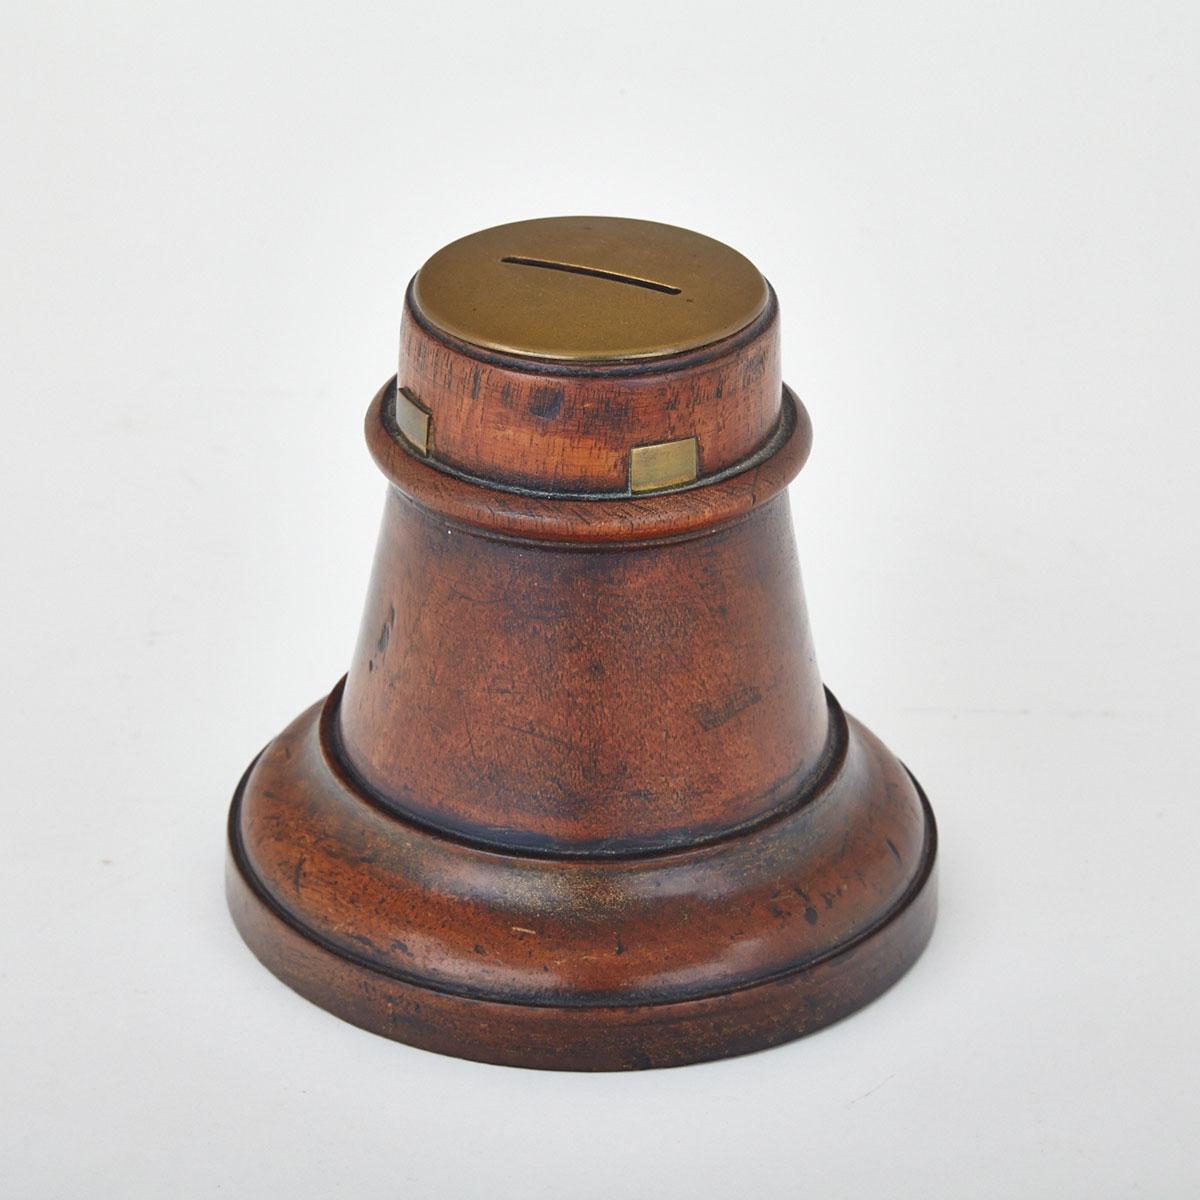 English Turned Walnut Bell Form Coin Bank, 19th century